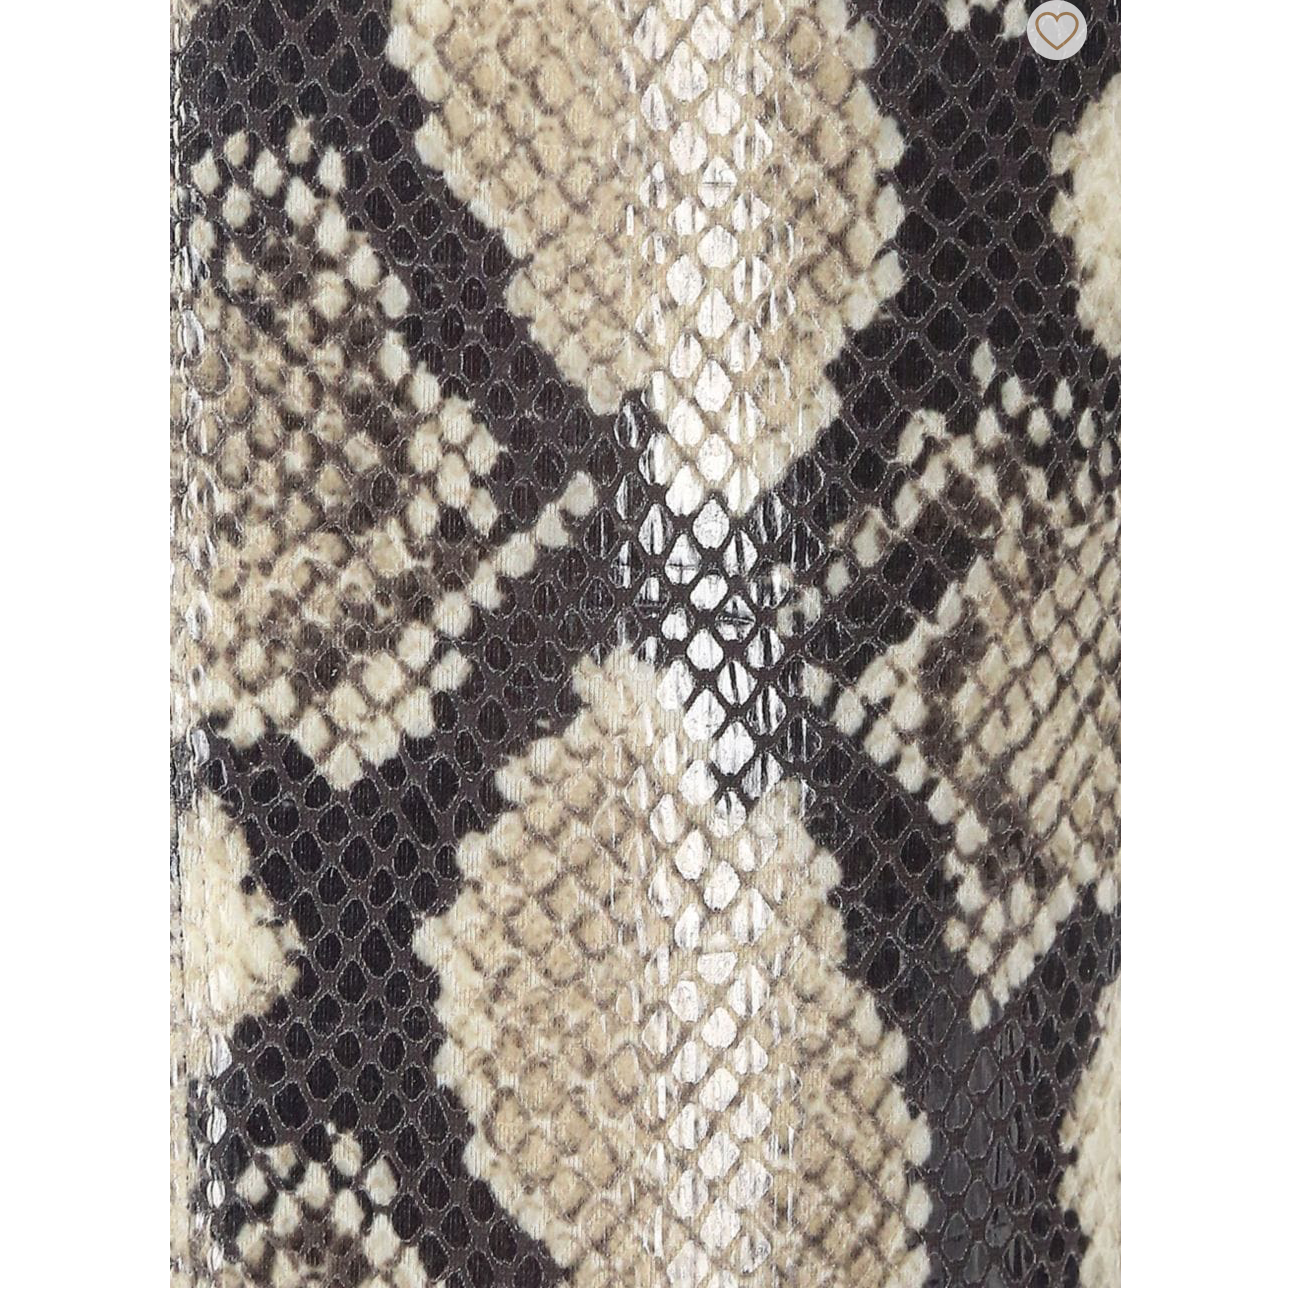 Shiloh Snake-Print Over-the-Knee Boots